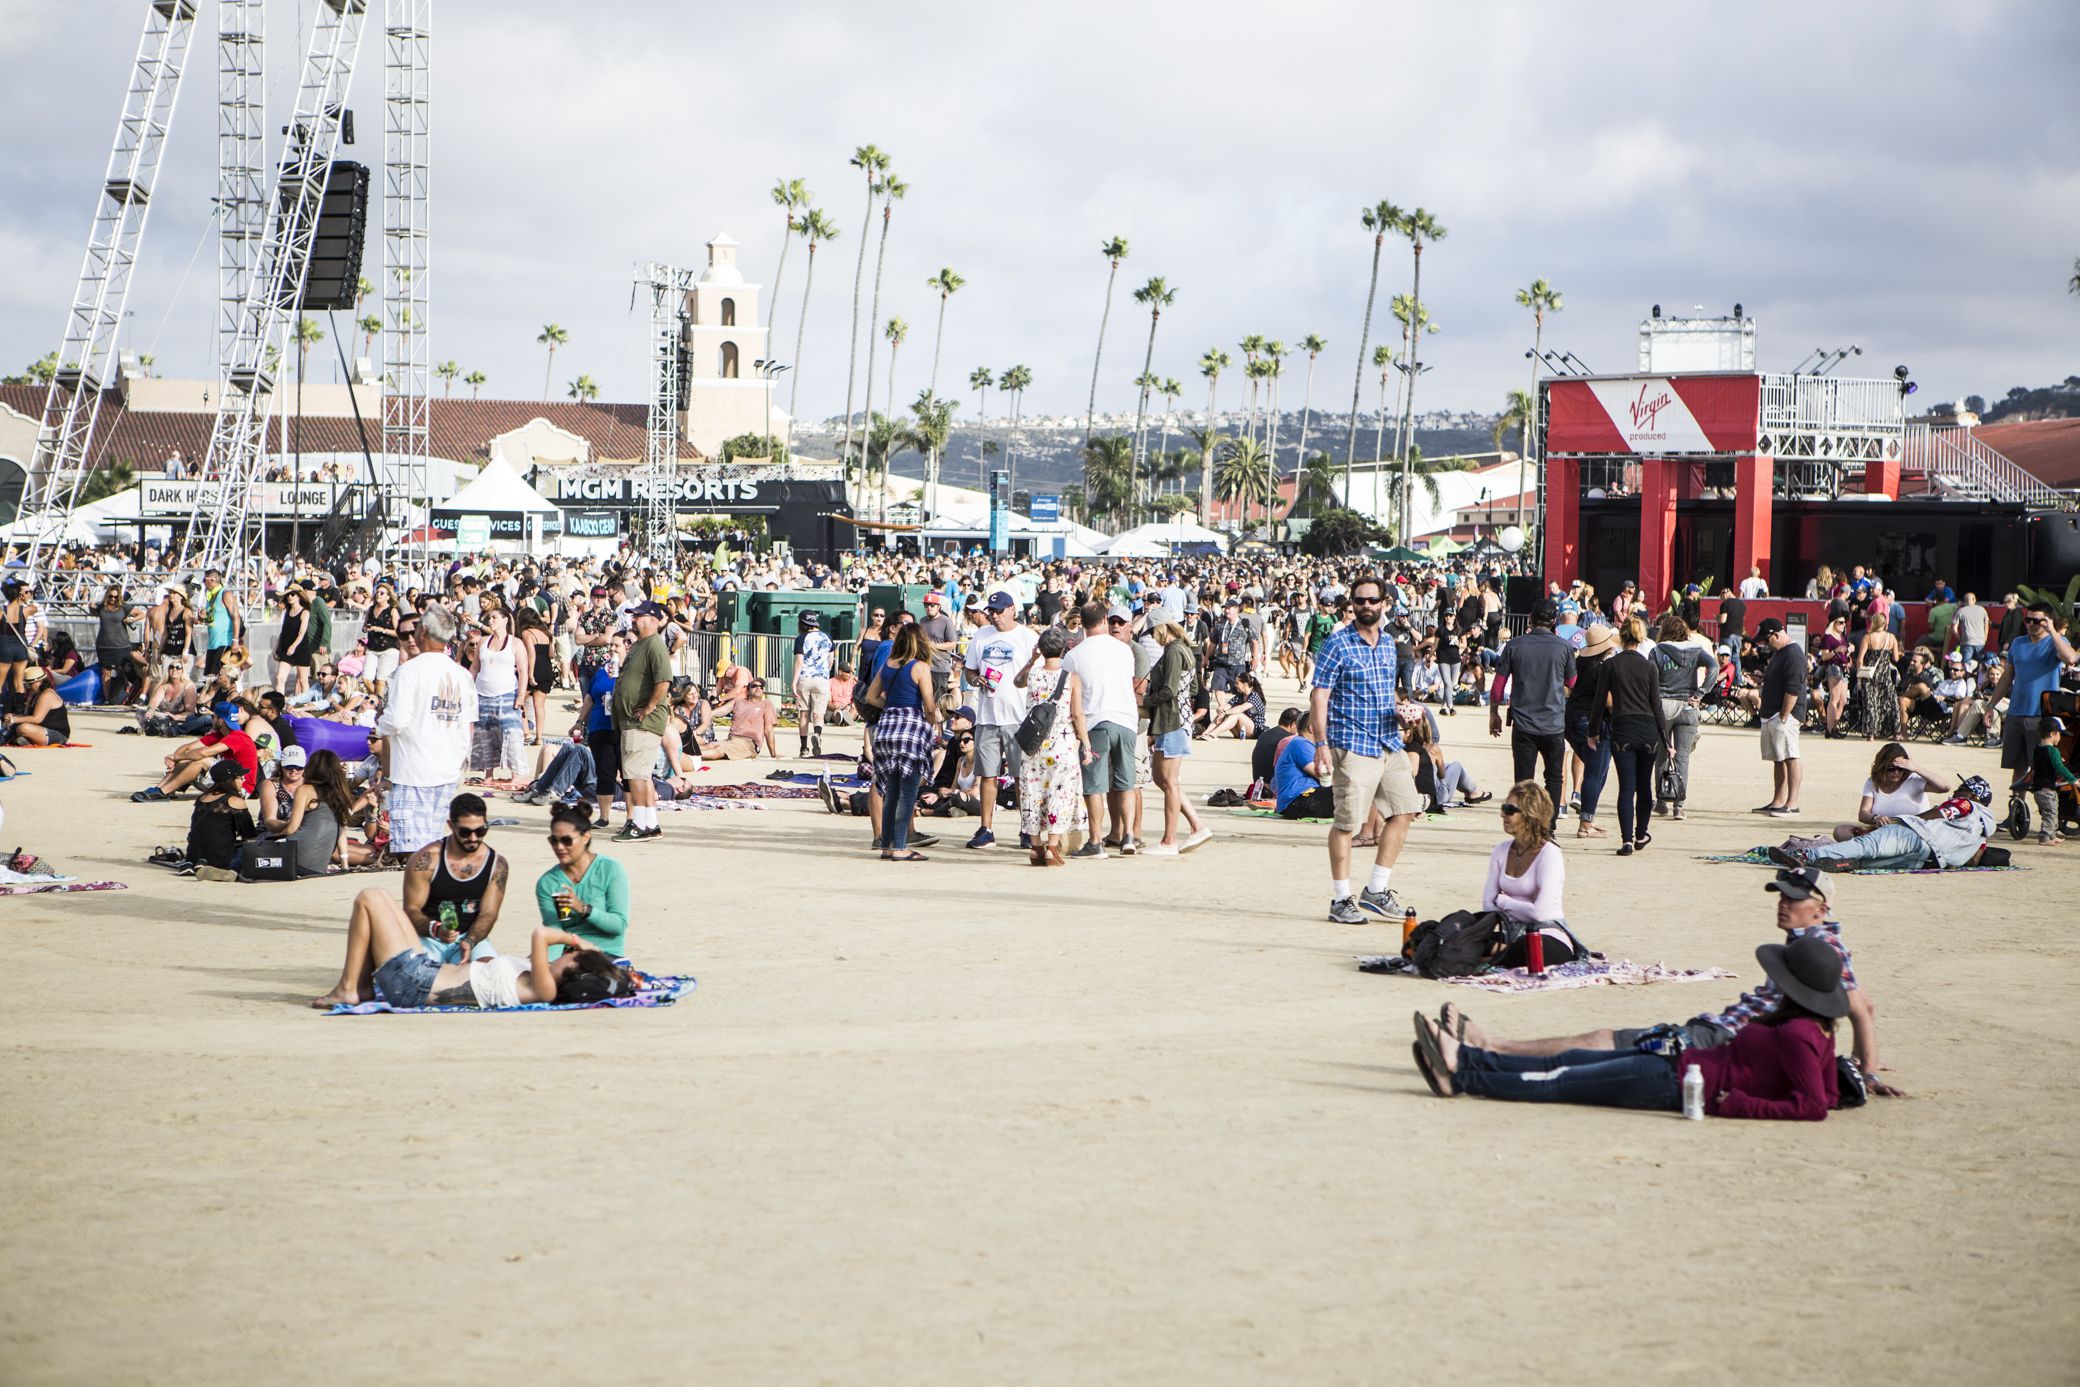 kaaboo 7 2 KAABOO Del Mar Succeeds at Being a Festival for Everyone